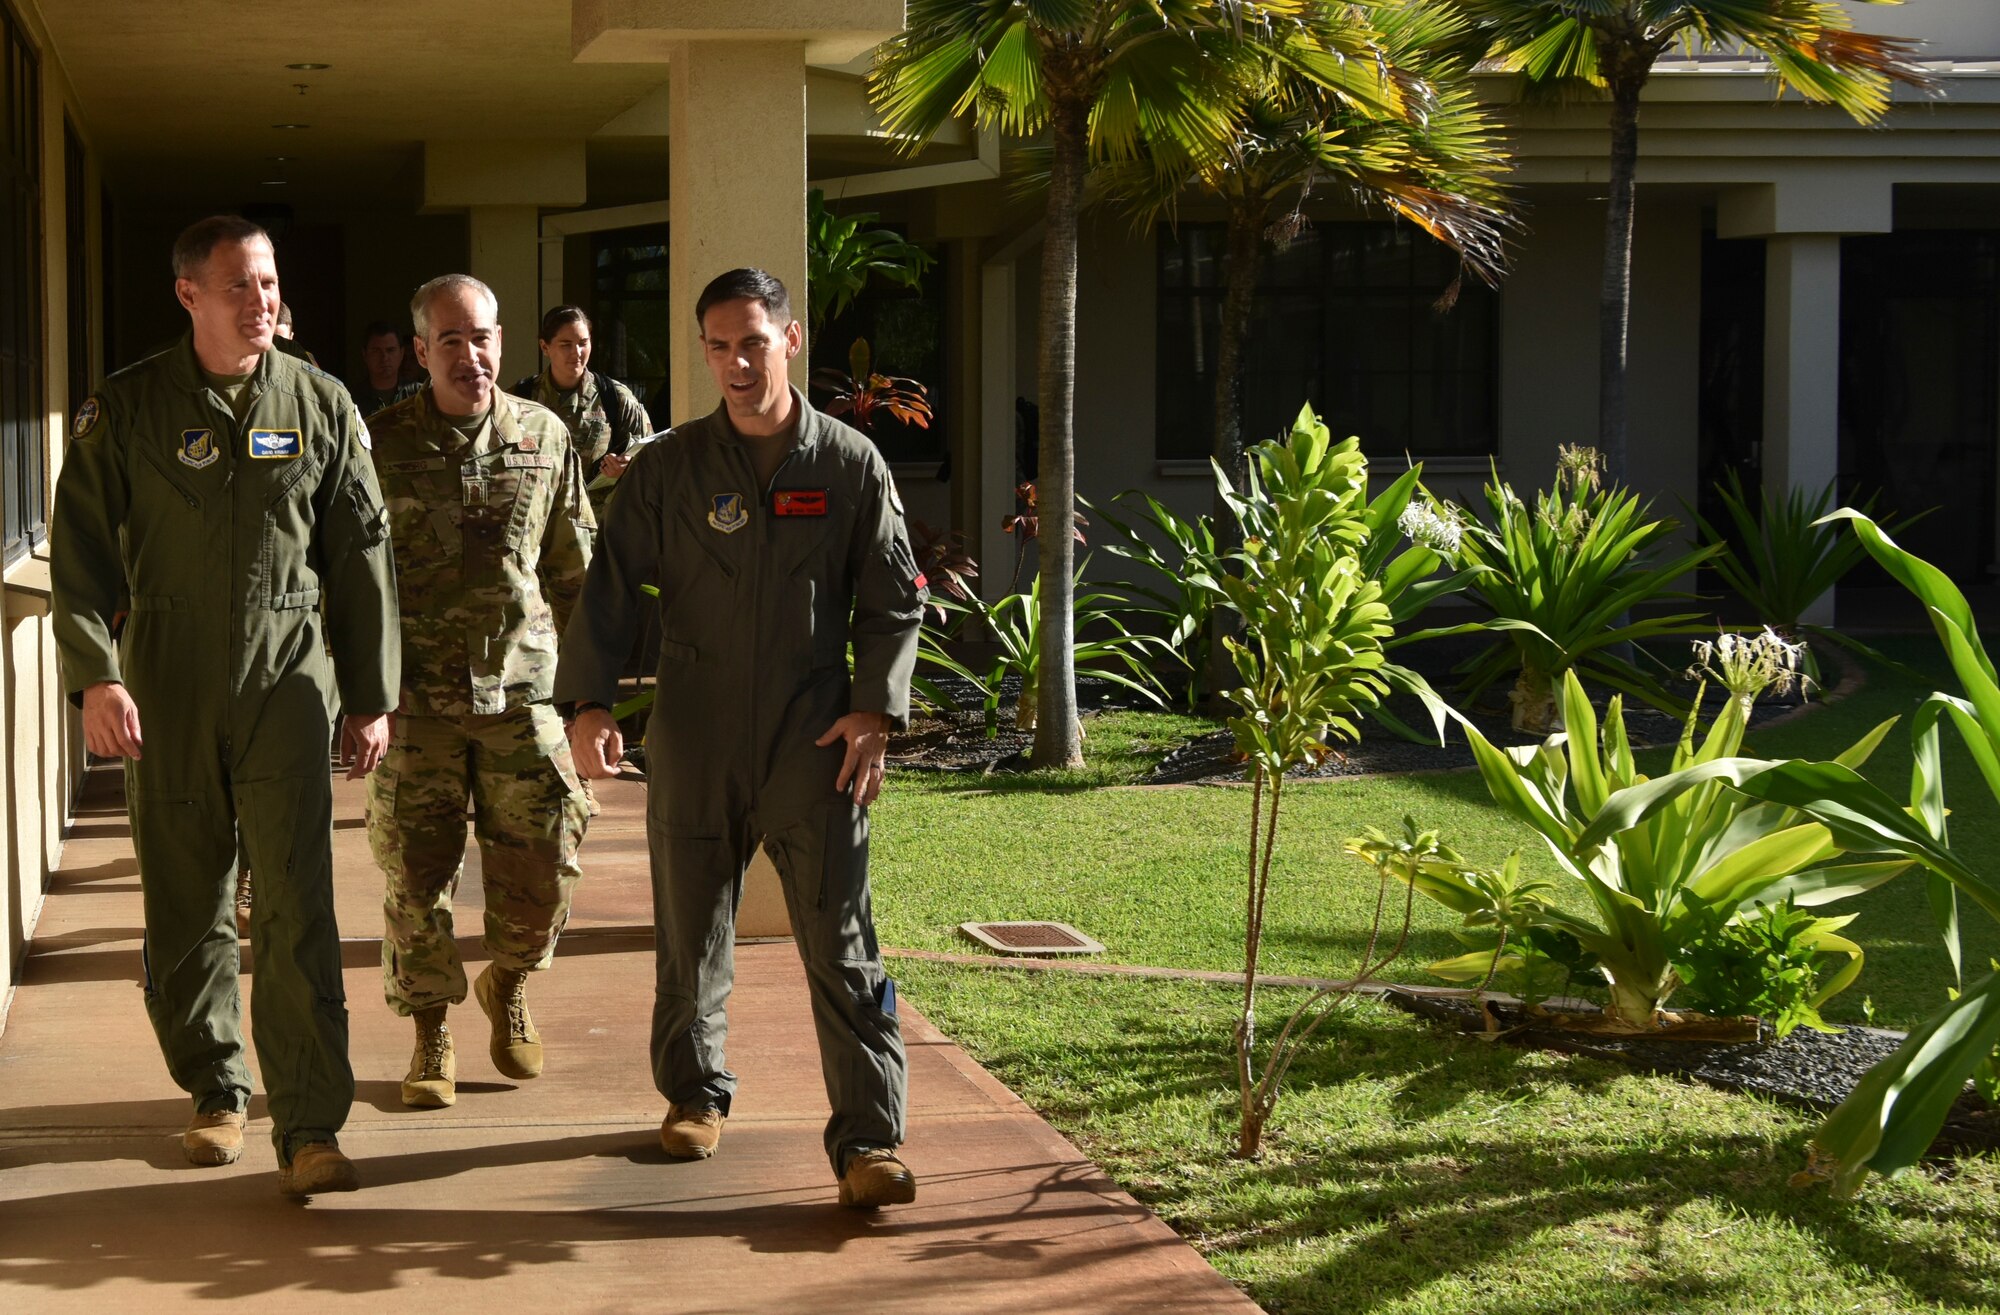 U.S. Air Force Lt. Gen. David A. Krumm, commander of Alaskan North American Aerospace Defense Command Region, Alaskan Command, and Eleventh Air Force, talks with Airmen assigned to the 15th Wing during a visit to Joint Base Pearl Harbor-Hickam, Hawaii, July 20, 2021.  Krumm visited several squadrons around the 15th Wing to gain an in-depth exposure to their unique mission and how the wing contributes to the Indo-Pacific region’s security and stability. (U.S. Air Force photo by Tech. Sgt. Anthony Nelson Jr.)